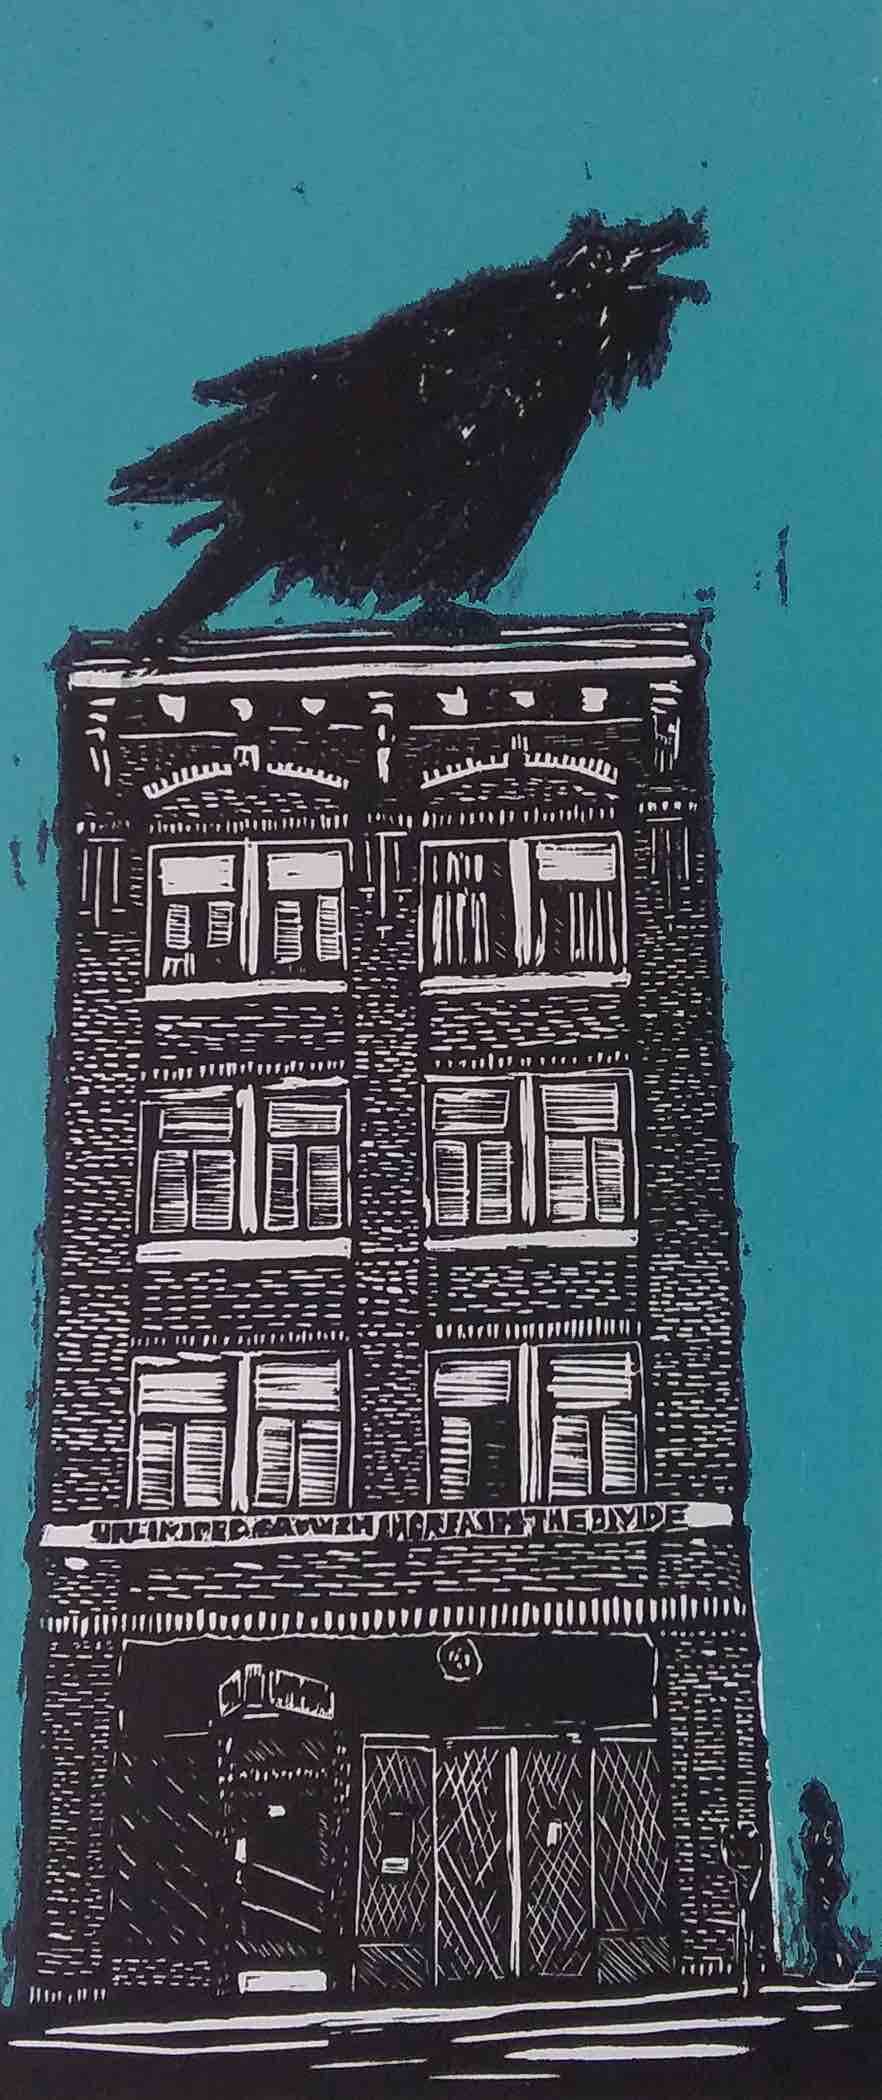 This is a print of a heritage office building, brick, with ornamental brickwork arches at its top and rickety retail windows at street level. The building is black and white, against a teal sky. A giant raven sits on the roof - about a story and a half in size - crowing gleefully to the side, beak agape. On the sidewalk below, the unhurried silhouette of a person walks towards the building.